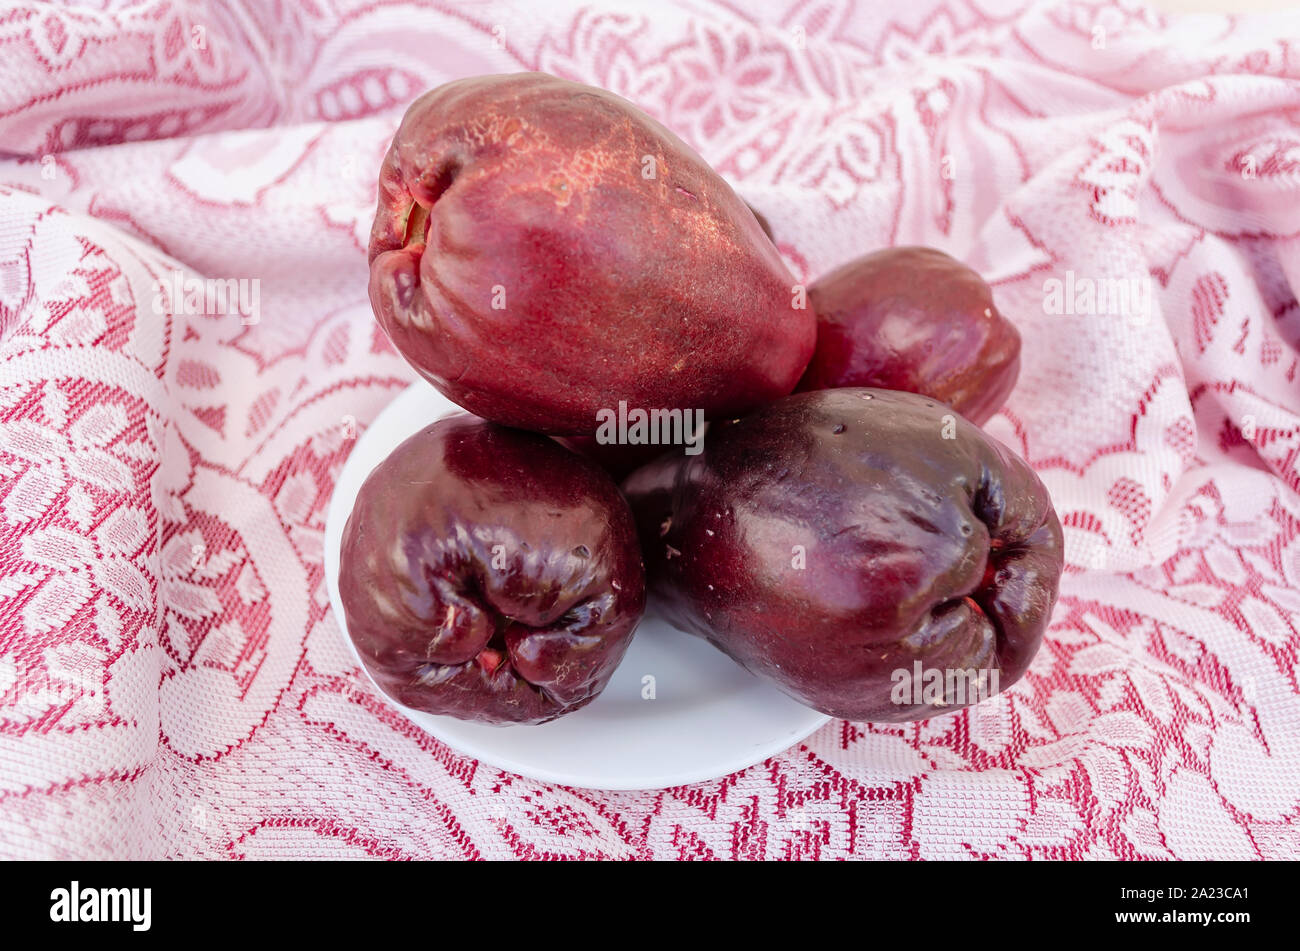 Red Ripe Otaheite Apples On Lace Tablecloth Stock Photo